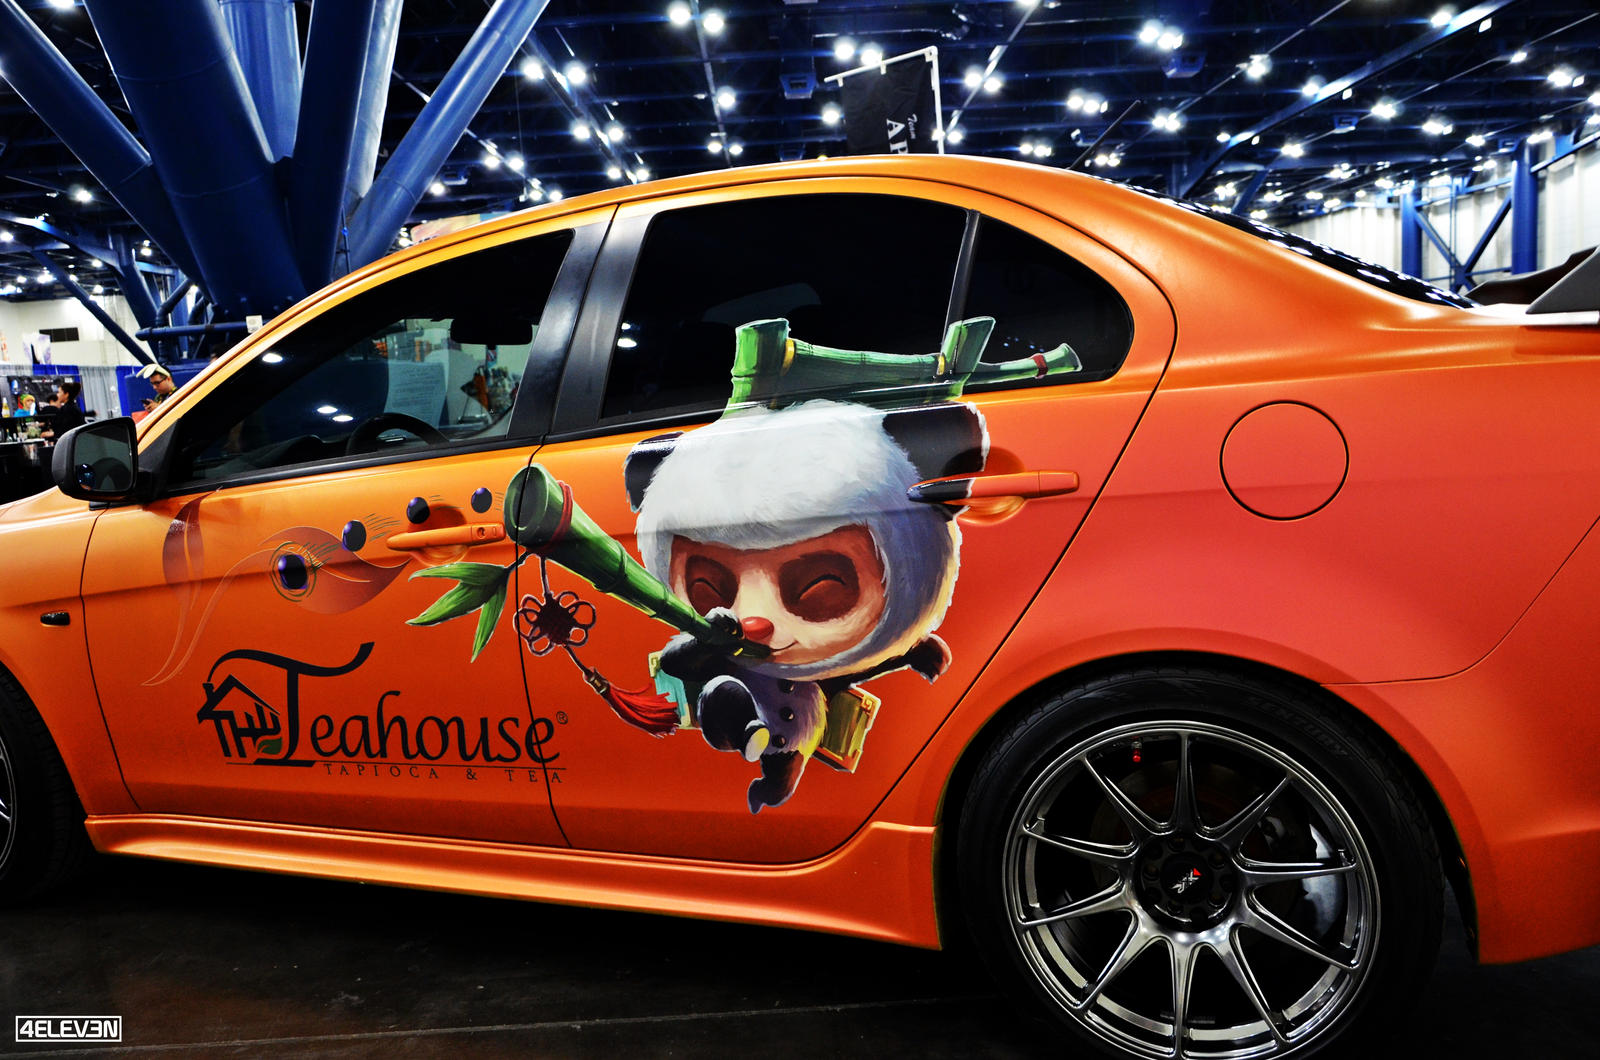 Anime wrapped car at Anime Matsuri Houston by 4ELEVEN-IMAGES on DeviantArt